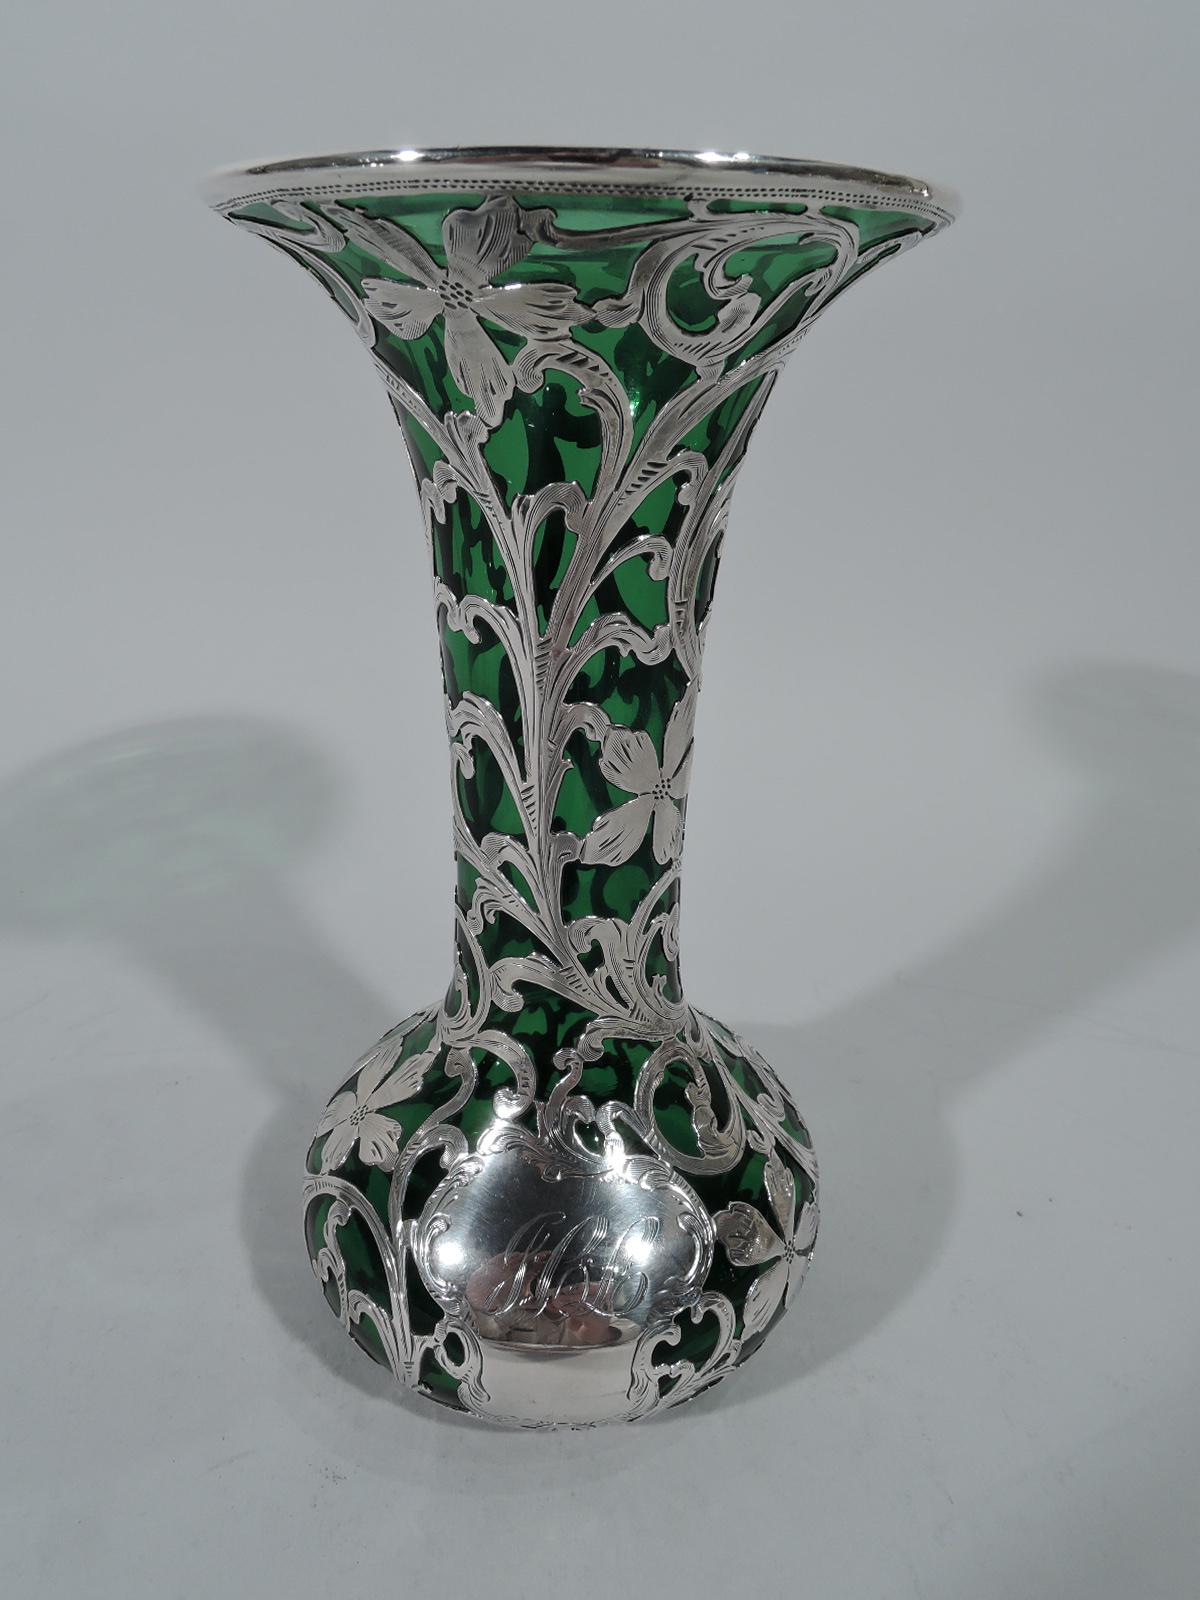 Art Nouveau emerald glass vase with engraved silver overlay. Made by Alvin in Providence. Bellied bowl with cylindrical neck and flared rim. Foliate scroll pattern interspersed with flowers. Asymmetrical cartouche engraved with script monogram.